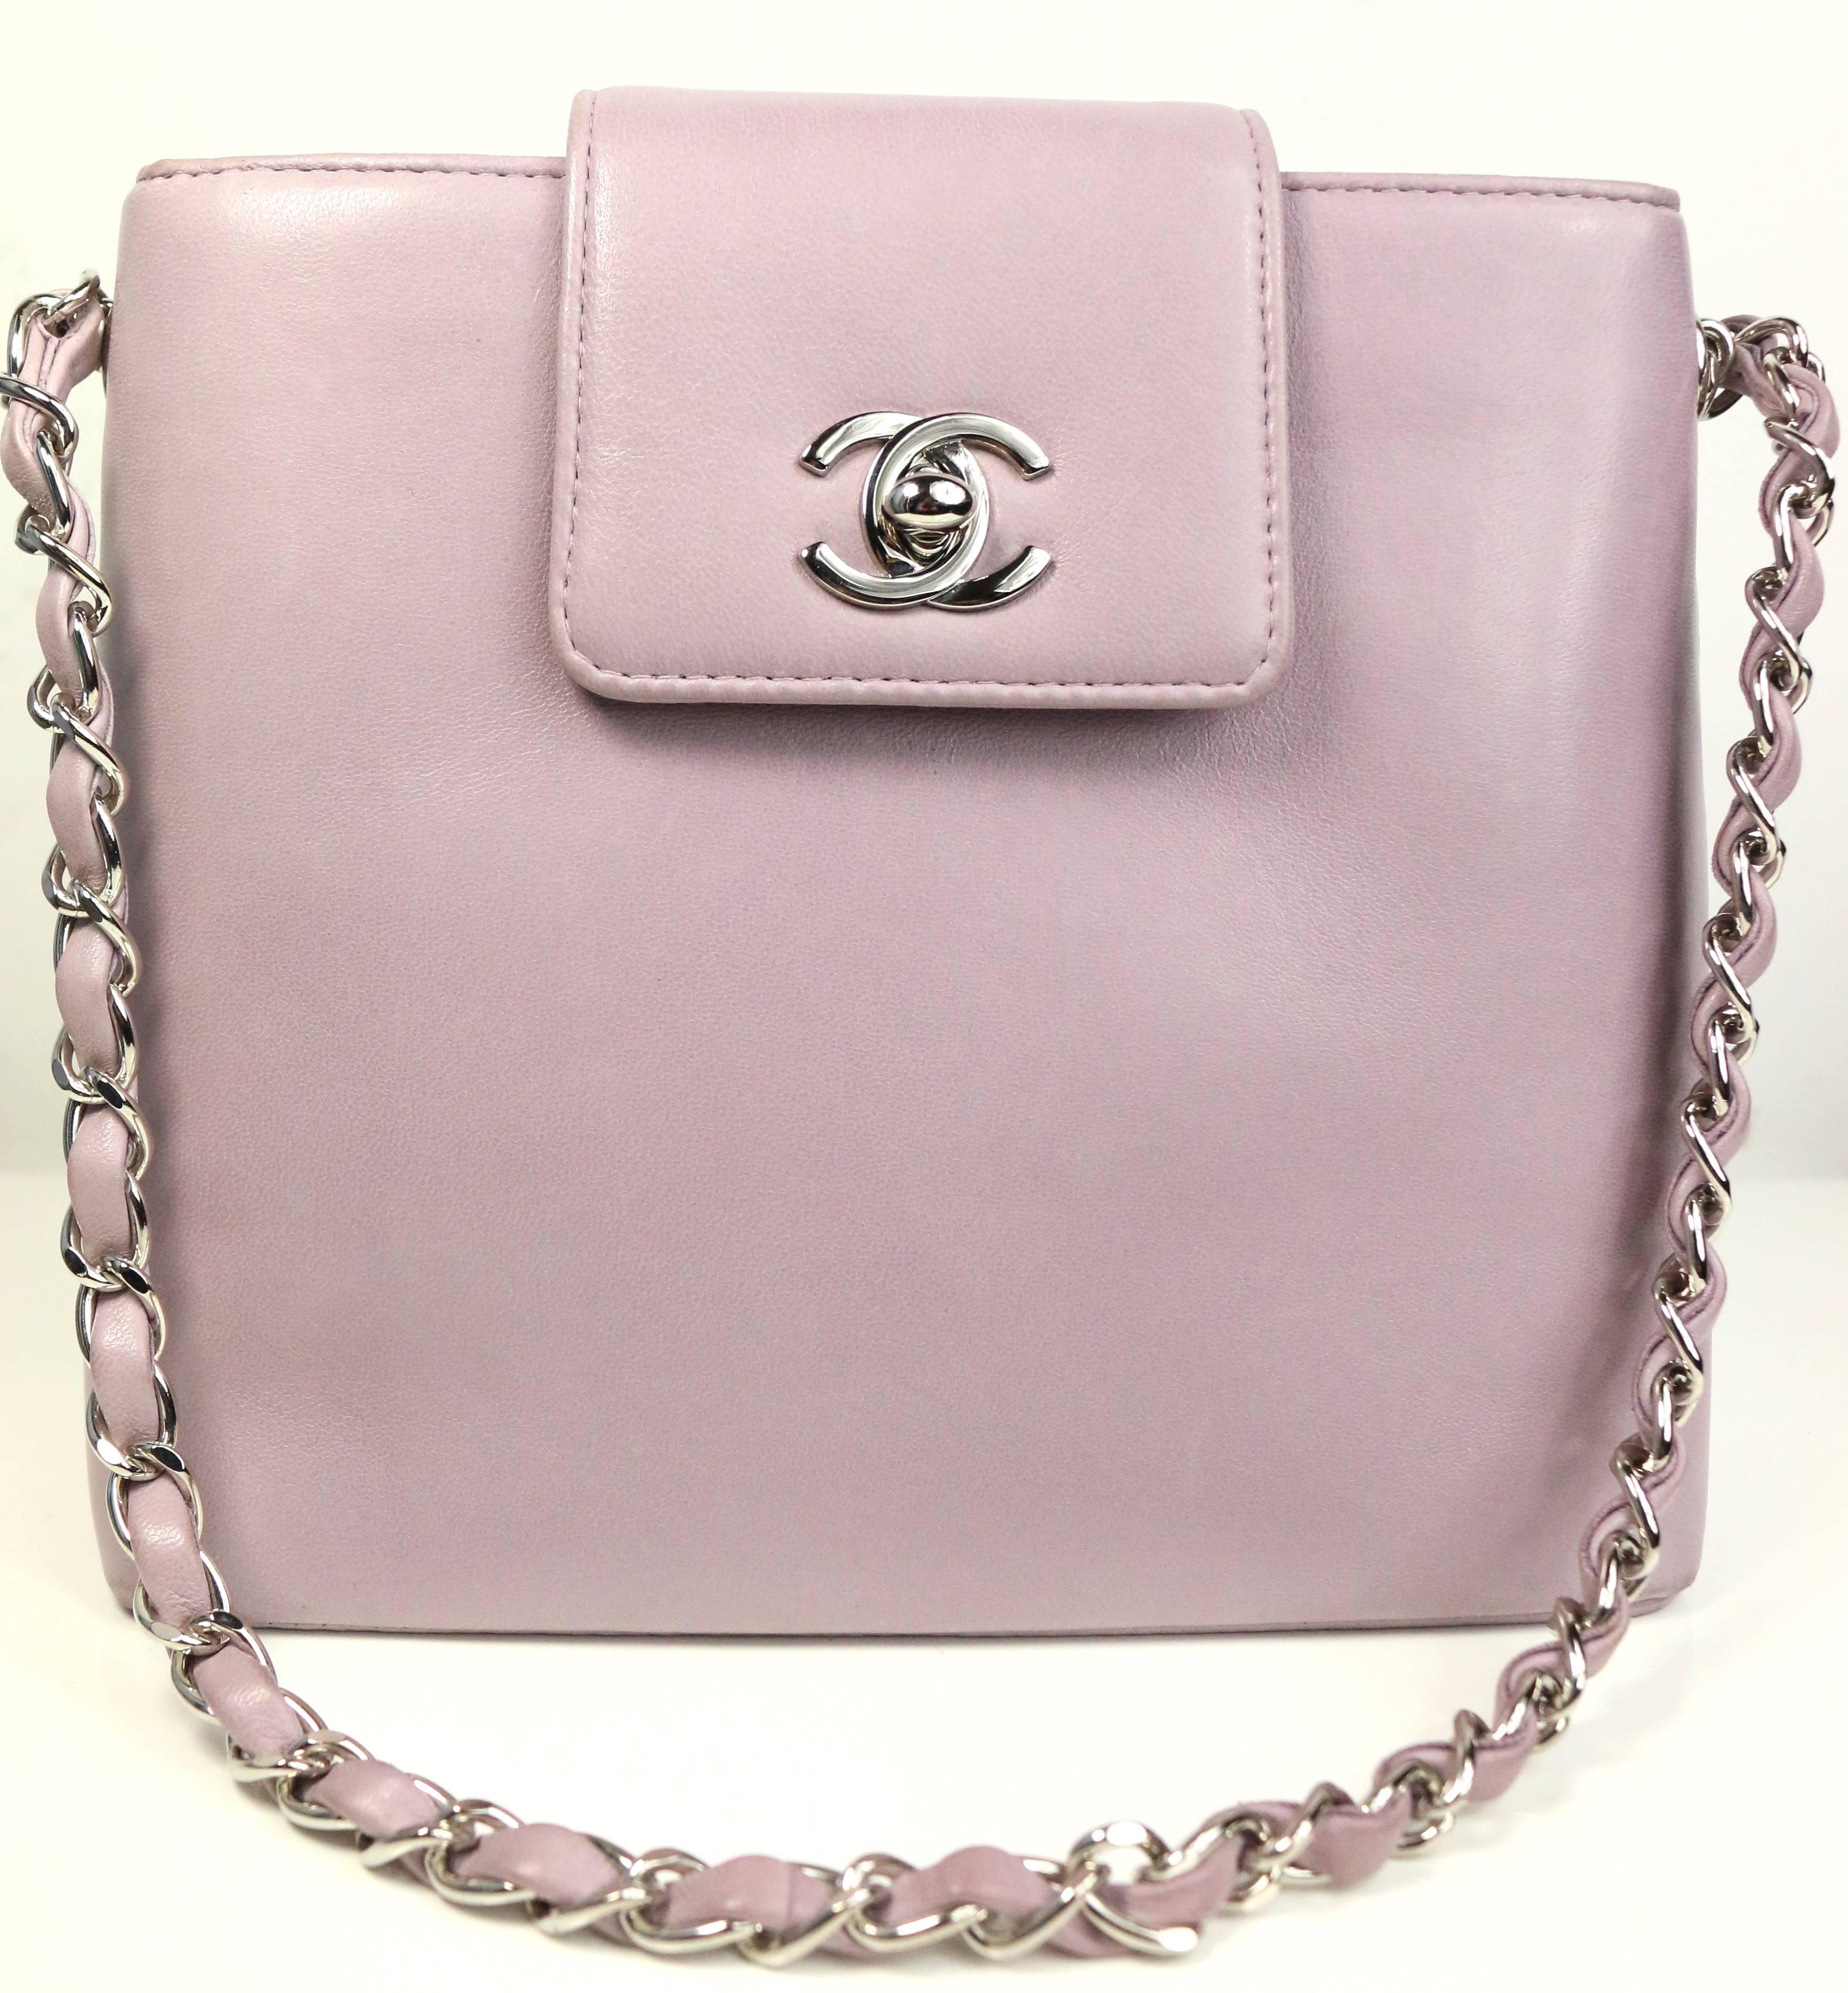 - Vintage 90s Chanel light purple lambskin leather with silver chain mini handbag. This bag is cute with great colour, featuring a little flap silver "CC" turn lock closure. An open pocket at the  back with one interior open pocket and one